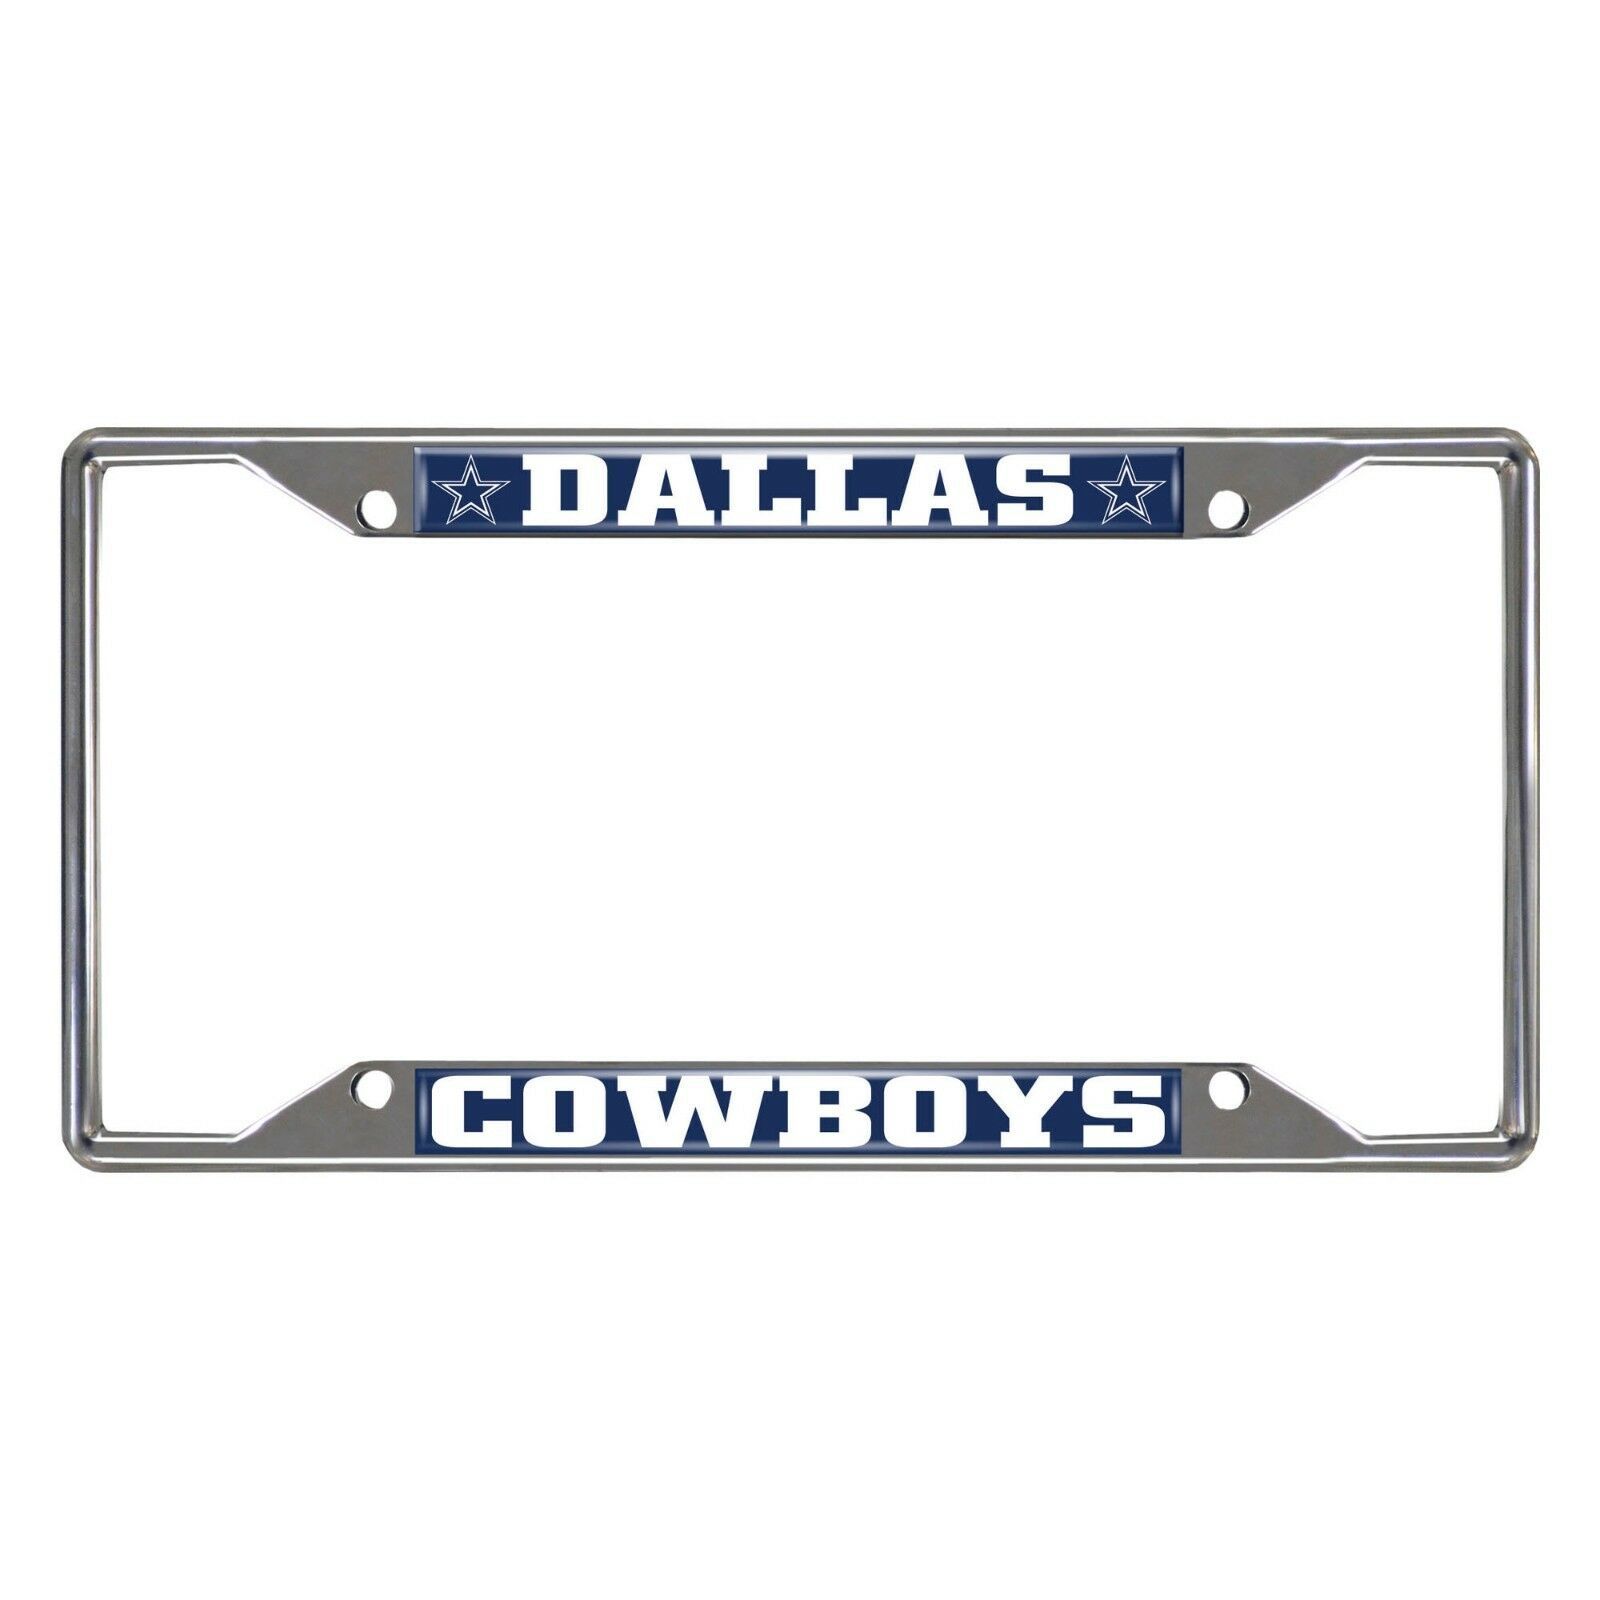 Fanmats NFL Dallas Cowboys Chrome Metal License Plate Frame Delivery 2-4 Days - $14.64